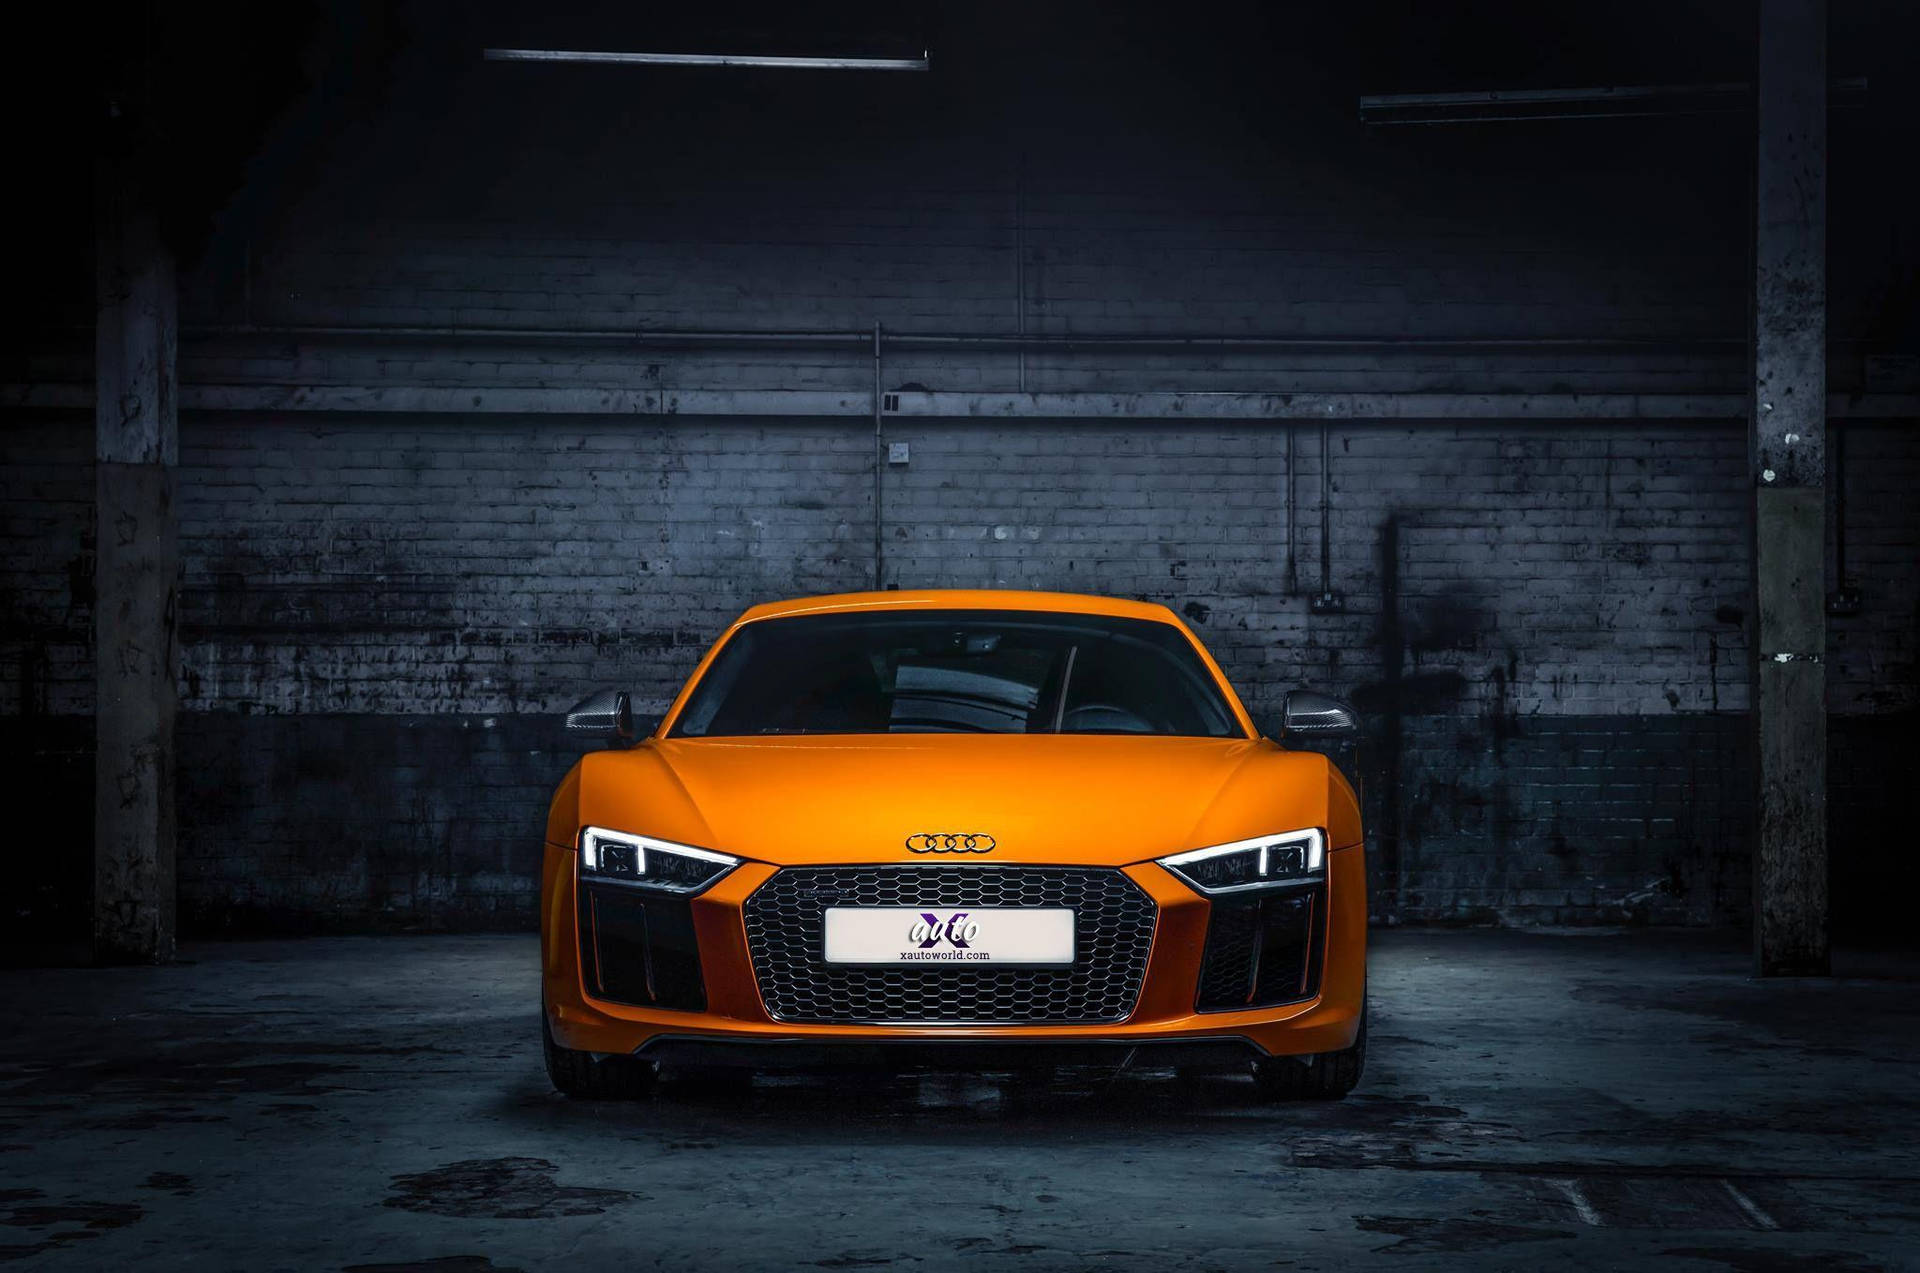 Caption: Dazzling Vegas Yellow Audi R8 In High Definition